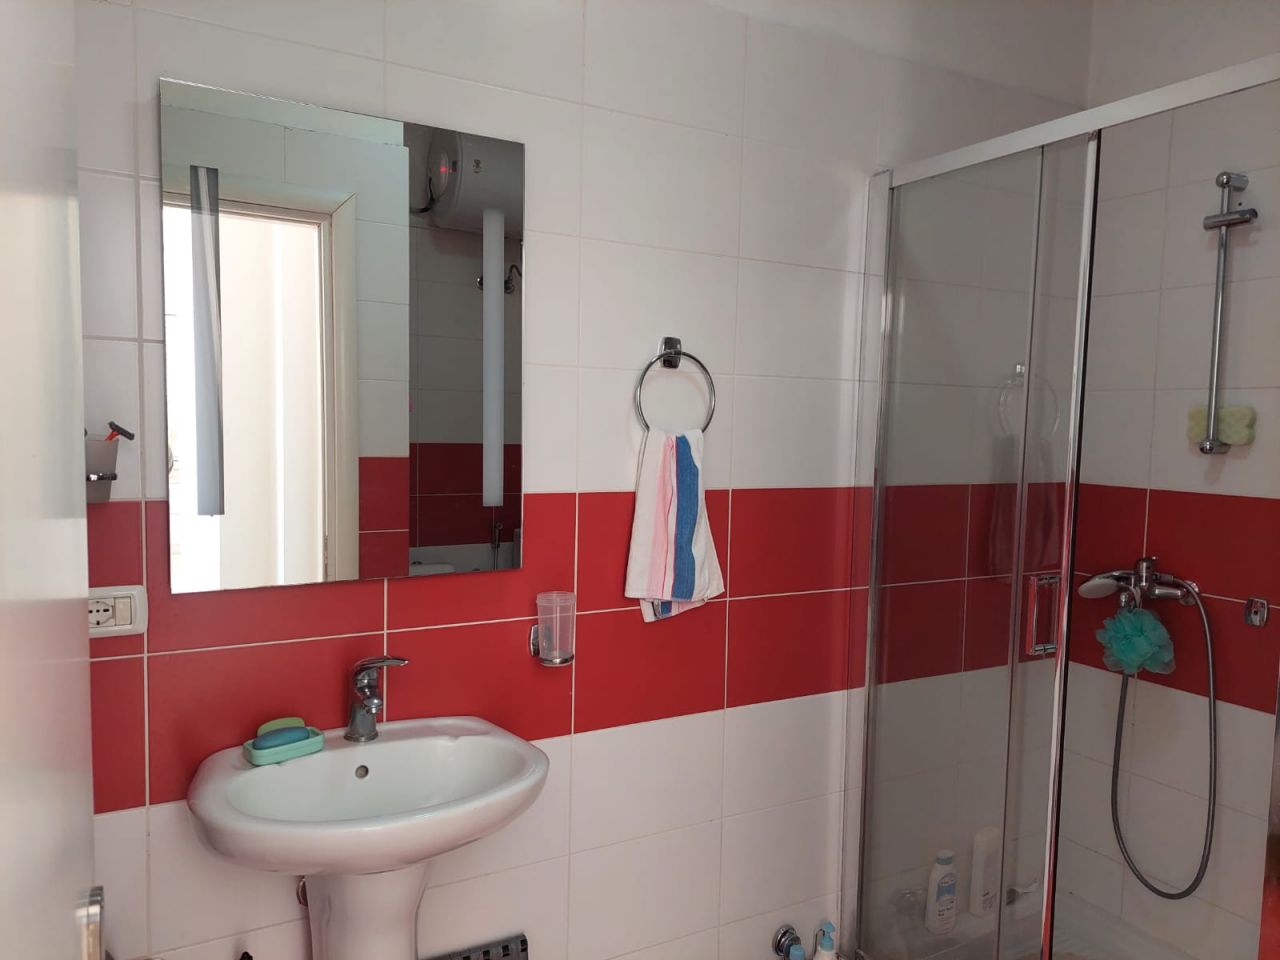 Apartment for sale in saranda. One bedroom apartment for sale in albania